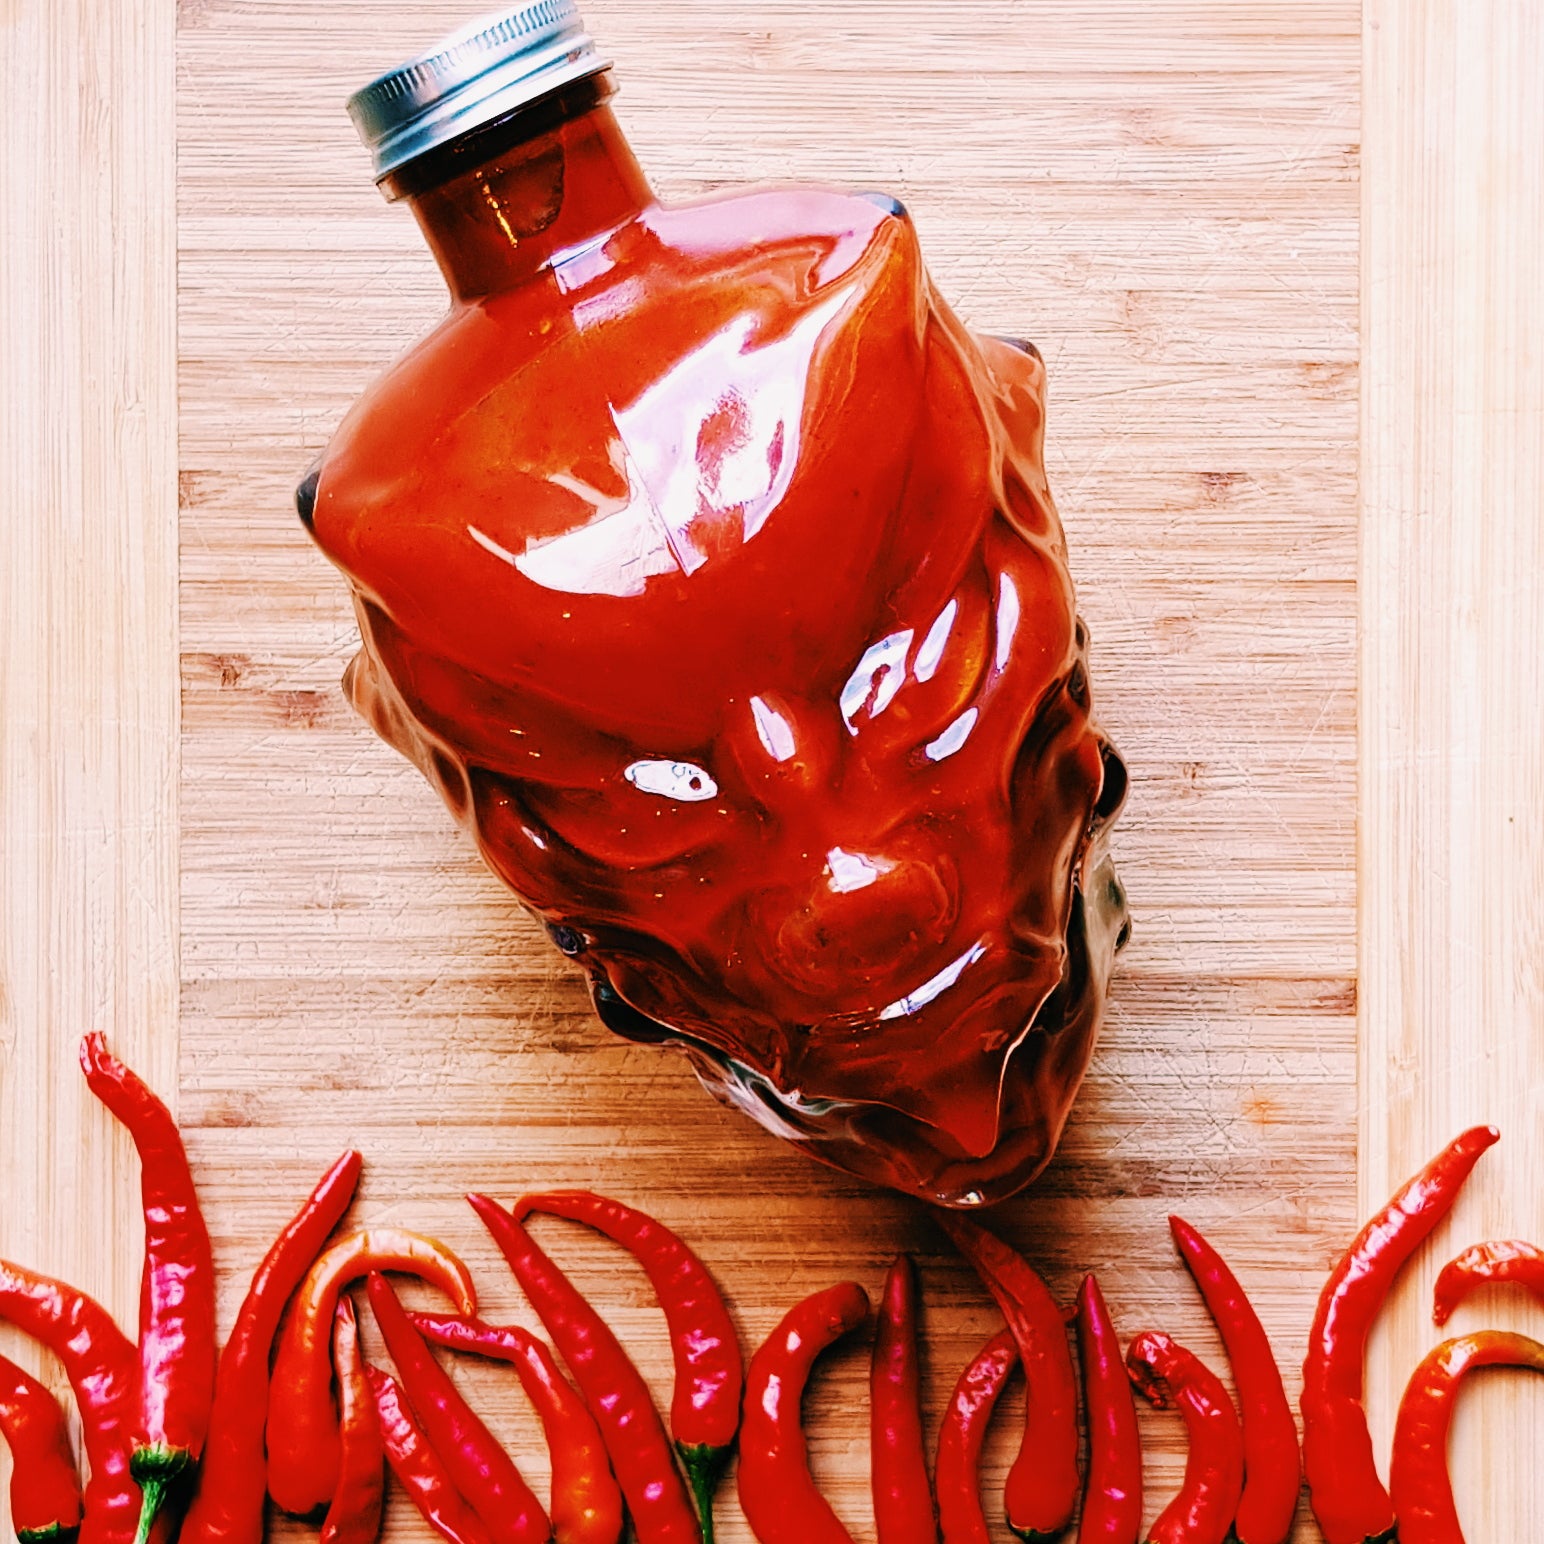 Hot Sauce Review: The Devil's Hot Sauce